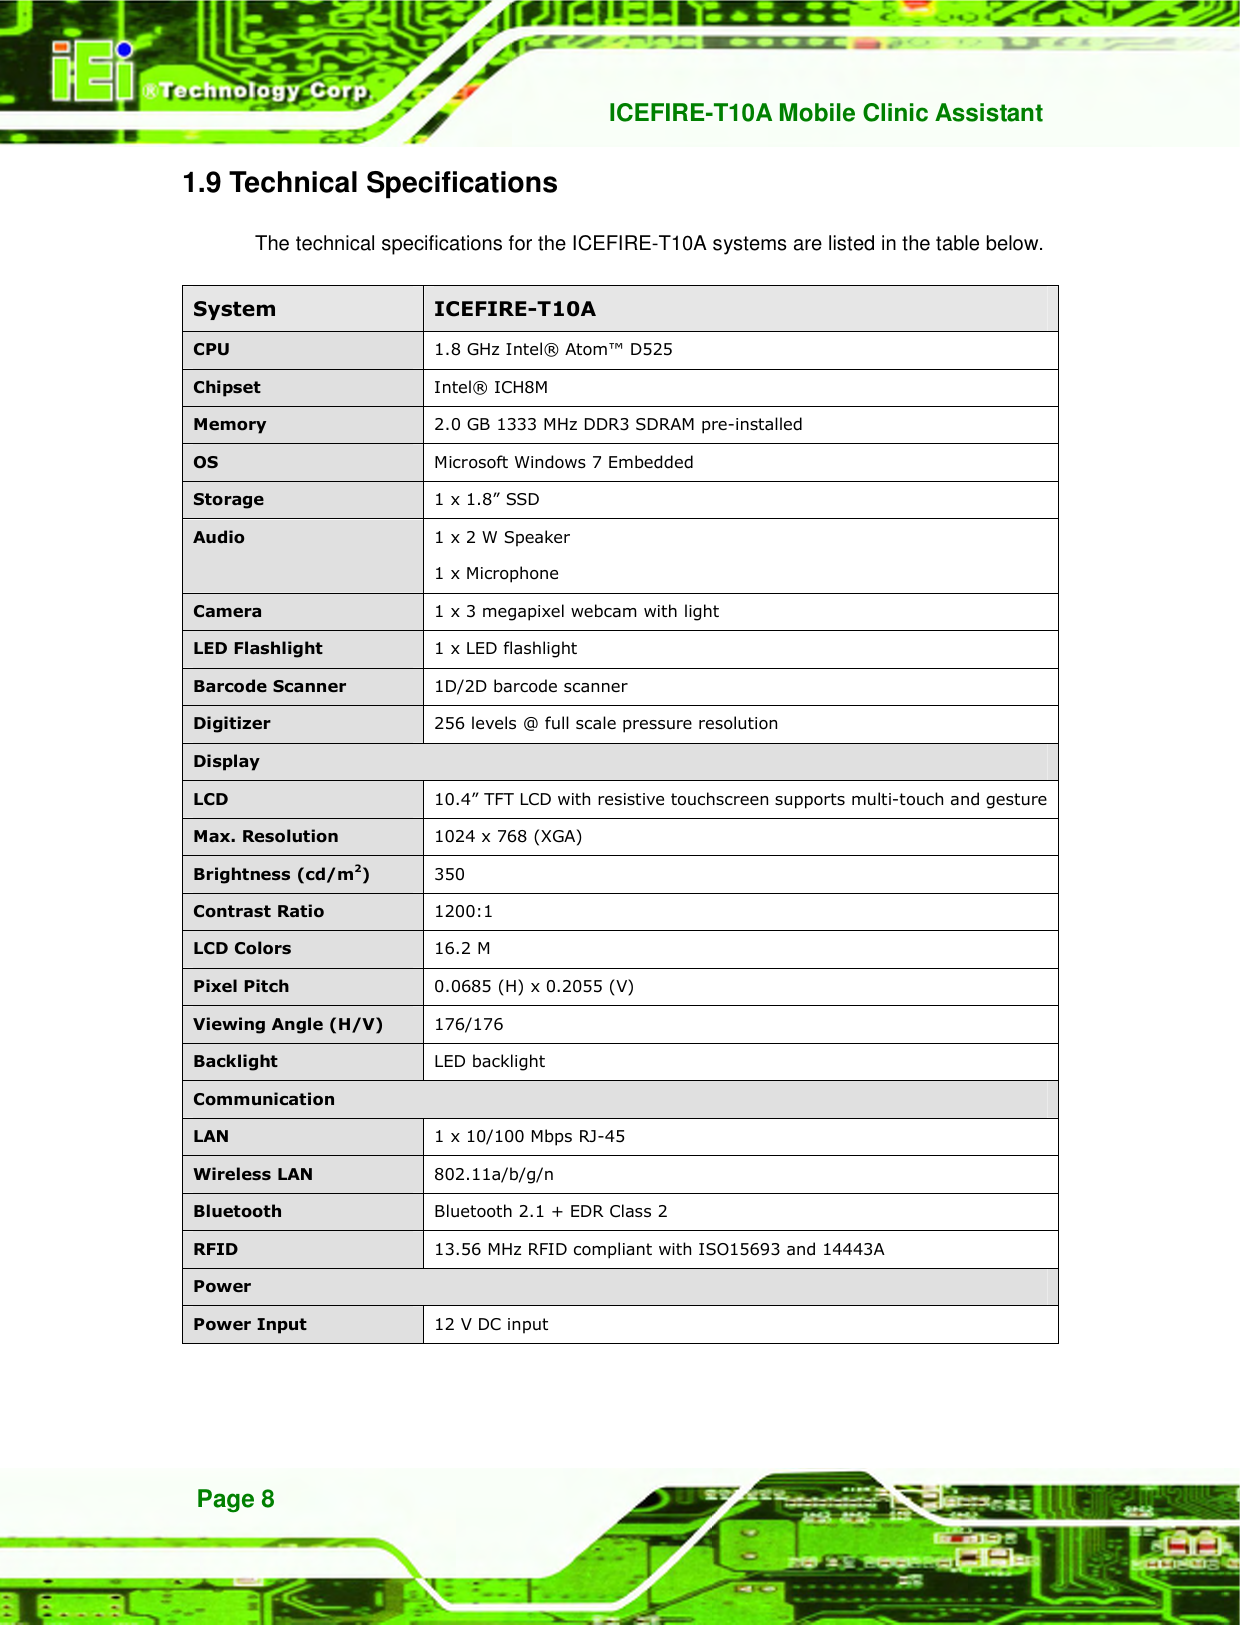   ICEFIRE-T10A Mobile Clinic Assistant Page 8 1.9 Technical Specifications The technical specifications for the ICEFIRE-T10A systems are listed in the table below. System  ICEFIRE-T10A CPU  1.8 GHz Intel® Atom™ D525   Chipset  Intel® ICH8M Memory  2.0 GB 1333 MHz DDR3 SDRAM pre-installed OS  Microsoft Windows 7 Embedded   Storage  1 x 1.8” SSD Audio  1 x 2 W Speaker 1 x Microphone Camera  1 x 3 megapixel webcam with light LED Flashlight  1 x LED flashlight   Barcode Scanner  1D/2D barcode scanner   Digitizer    256 levels @ full scale pressure resolution Display LCD    10.4” TFT LCD with resistive touchscreen supports multi-touch and gesture Max. Resolution  1024 x 768 (XGA) Brightness (cd/m2)  350 Contrast Ratio  1200:1 LCD Colors  16.2 M Pixel Pitch  0.0685 (H) x 0.2055 (V) Viewing Angle (H/V)  176/176 Backlight    LED backlight Communication   LAN  1 x 10/100 Mbps RJ-45 Wireless LAN  802.11a/b/g/n Bluetooth  Bluetooth 2.1 + EDR Class 2 RFID  13.56 MHz RFID compliant with ISO15693 and 14443A Power Power Input  12 V DC input 